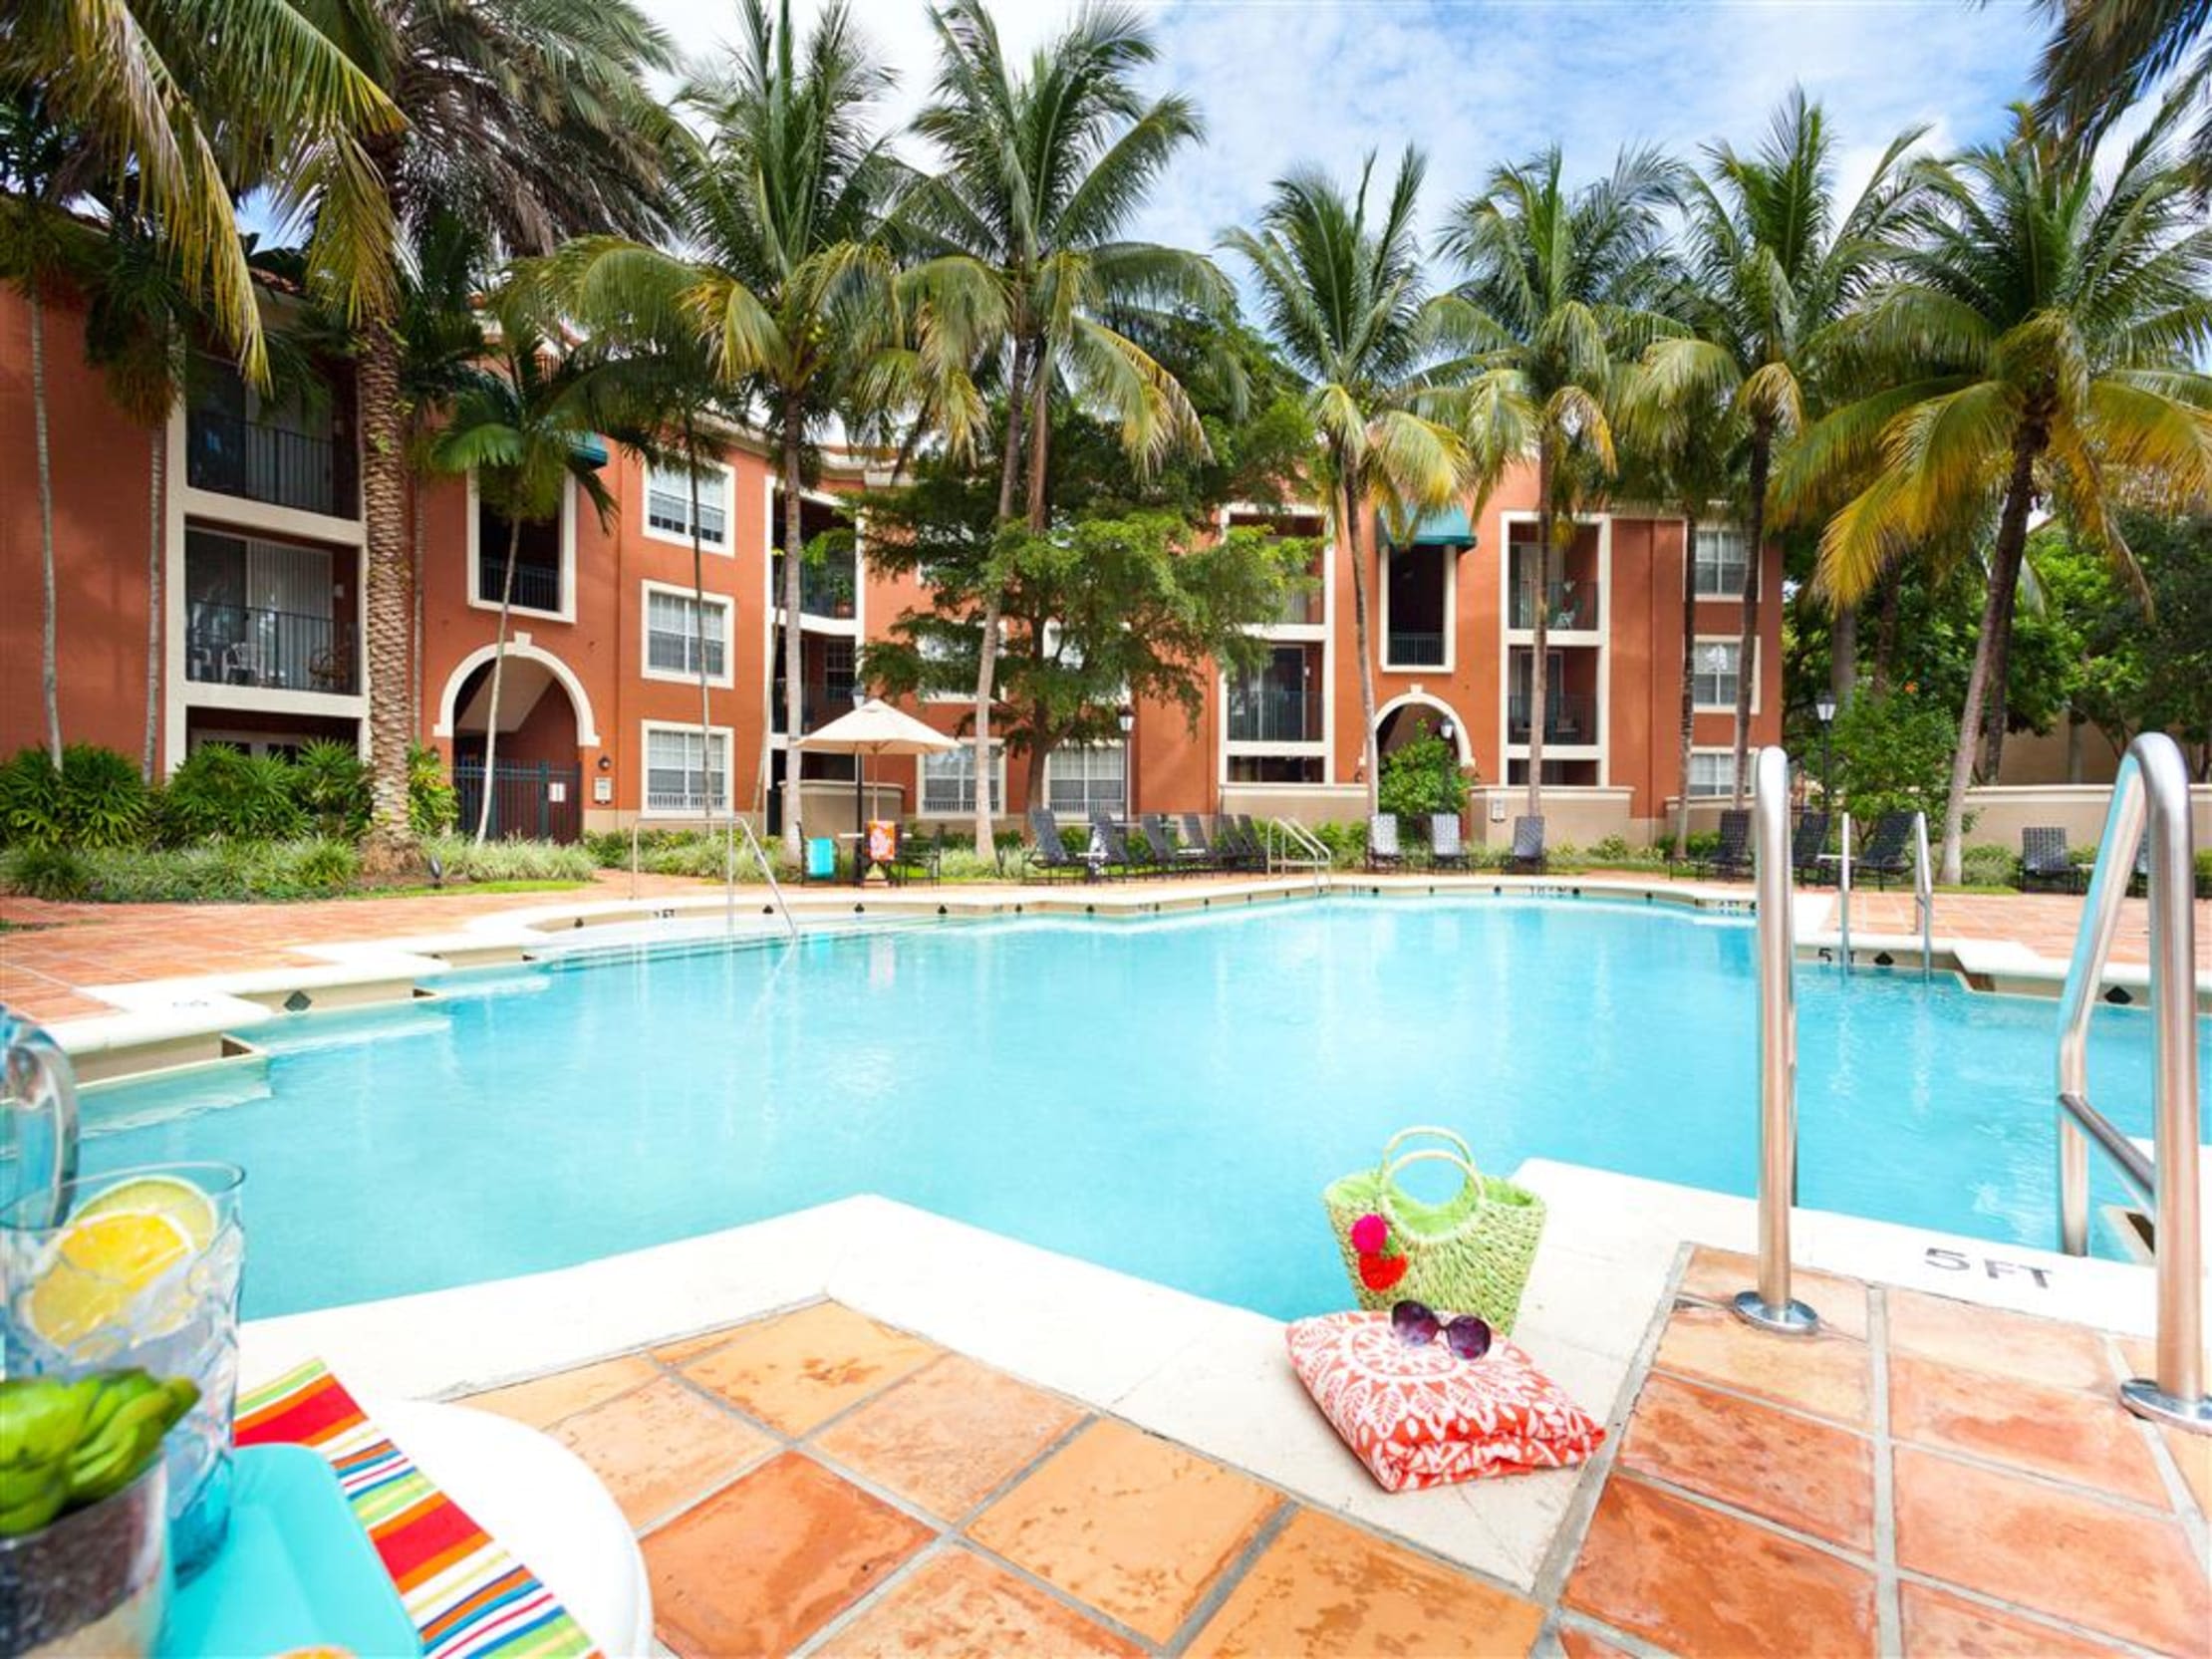 Resort-style swimming pool with Spanish tile deck at Crescent House Apartments in Miami Lakes, Florida